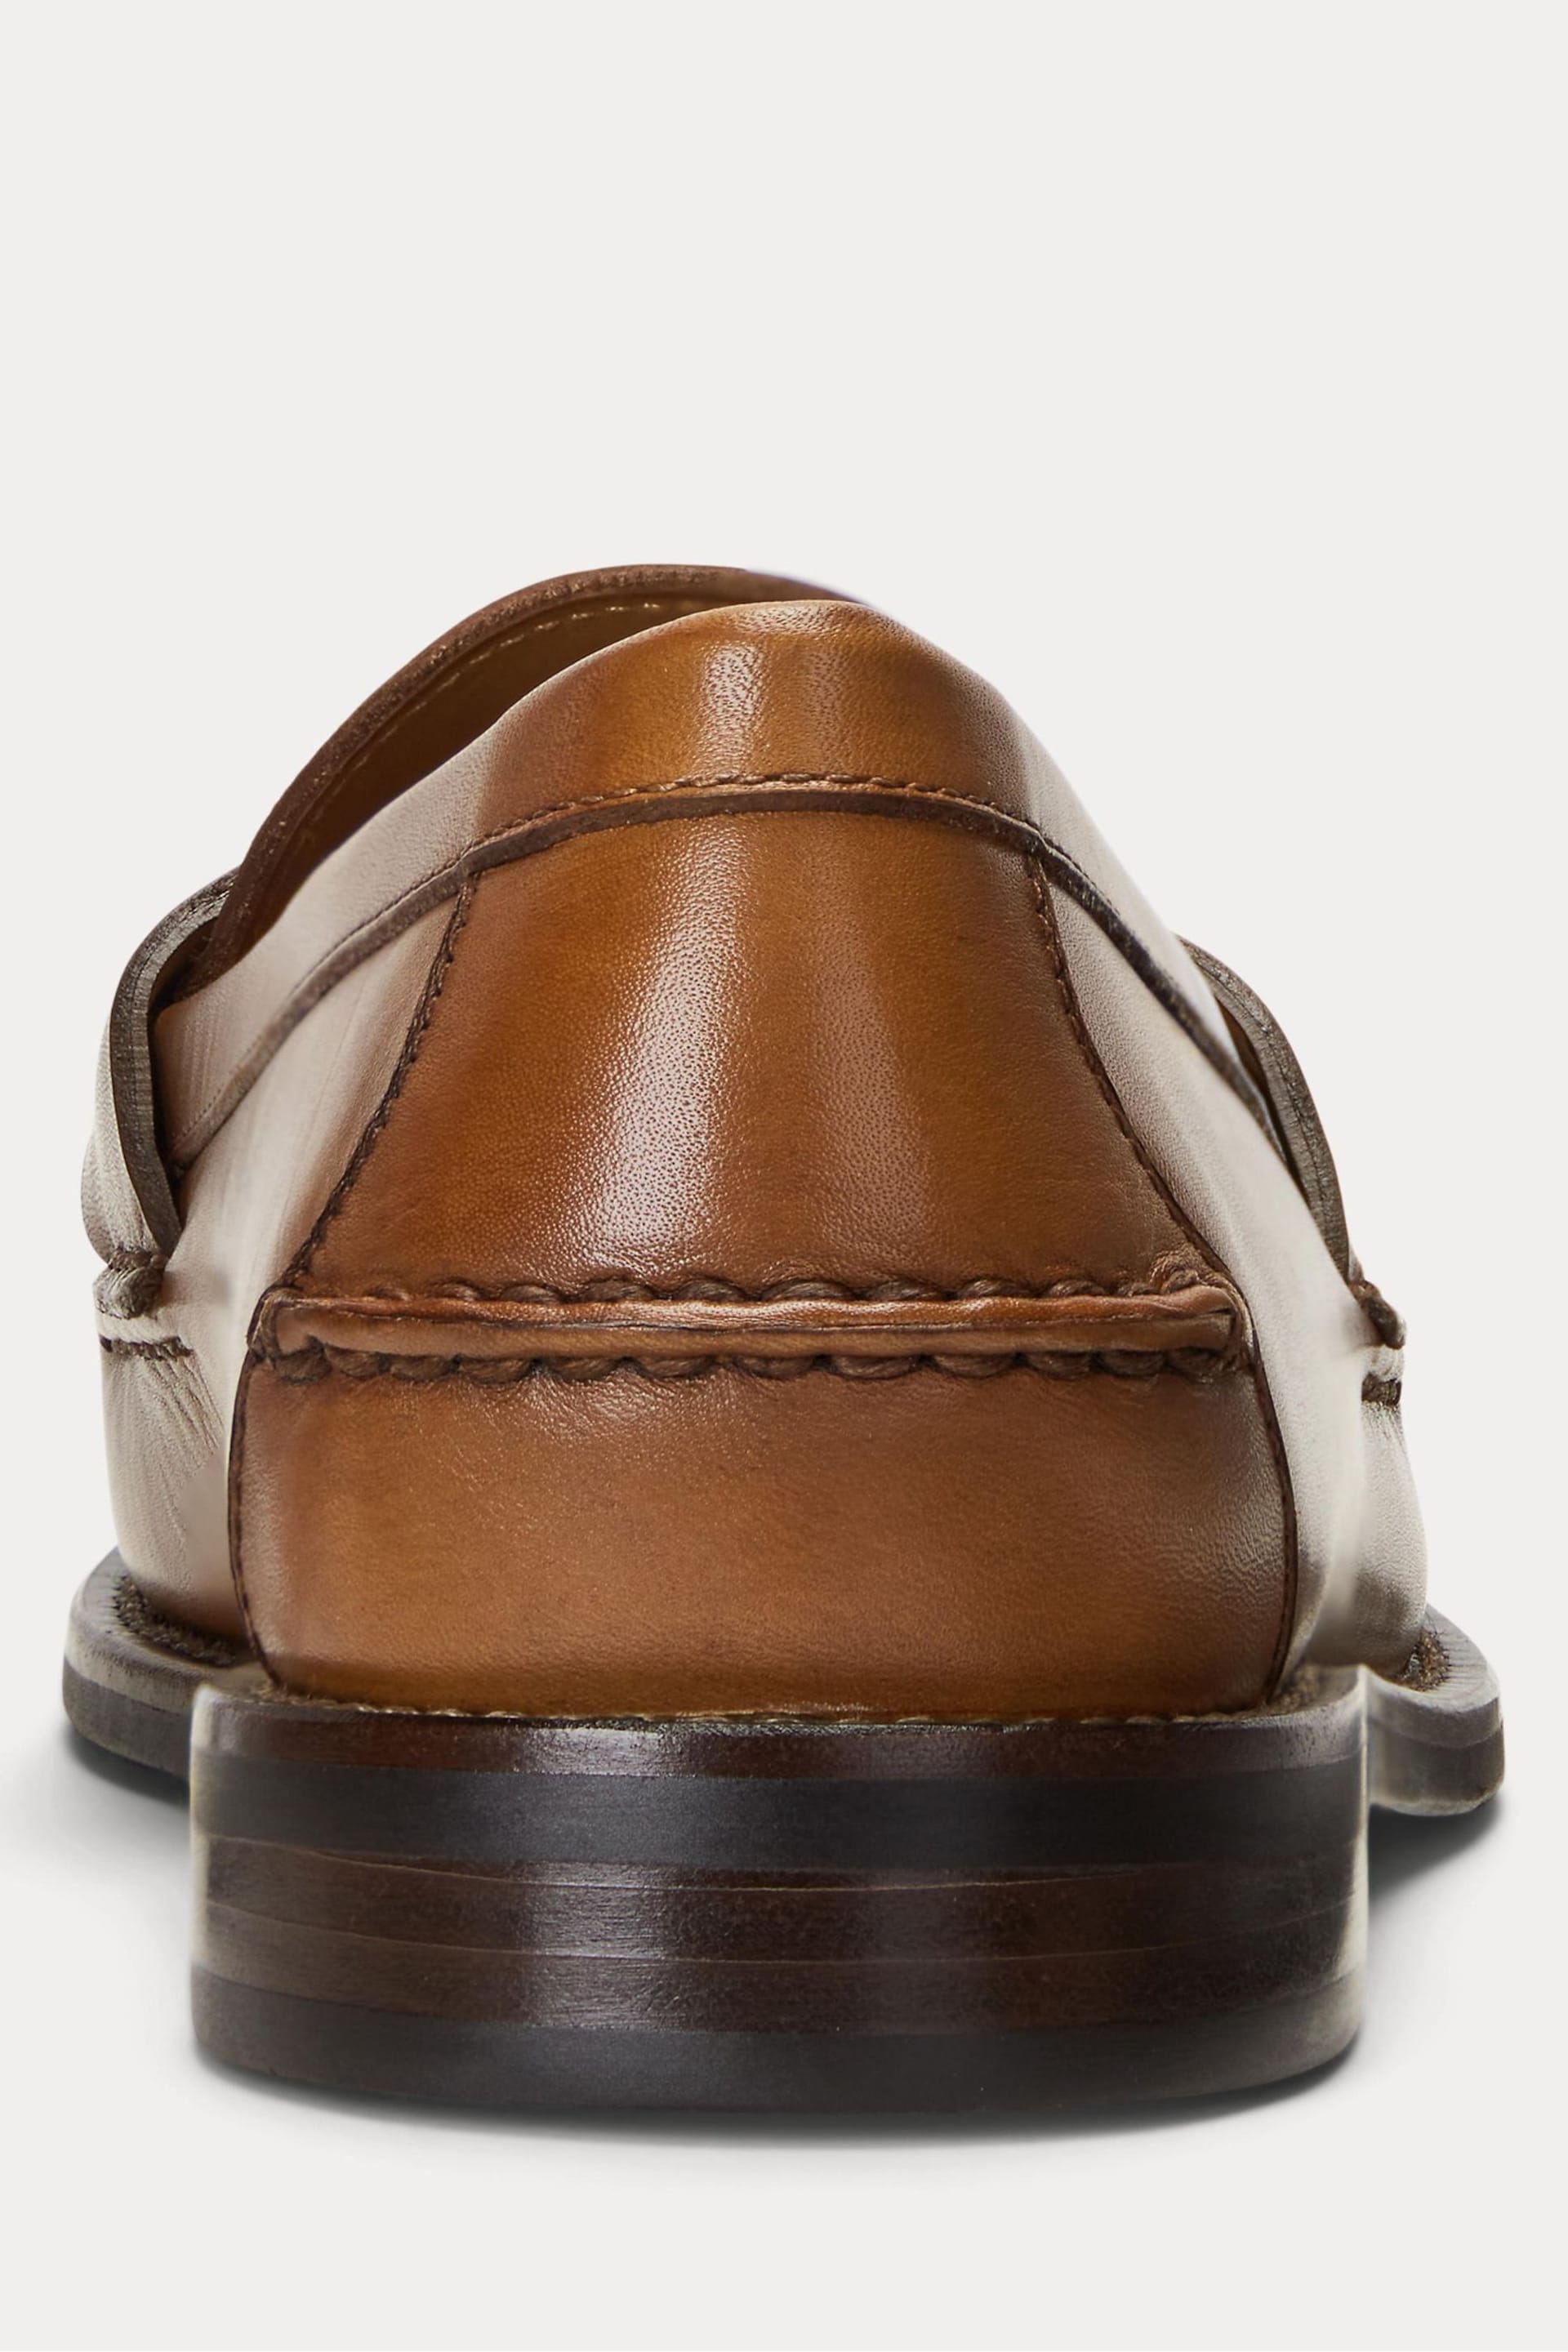 Polo Ralph Lauren Leather Alston Pony Loafers - Image 3 of 4